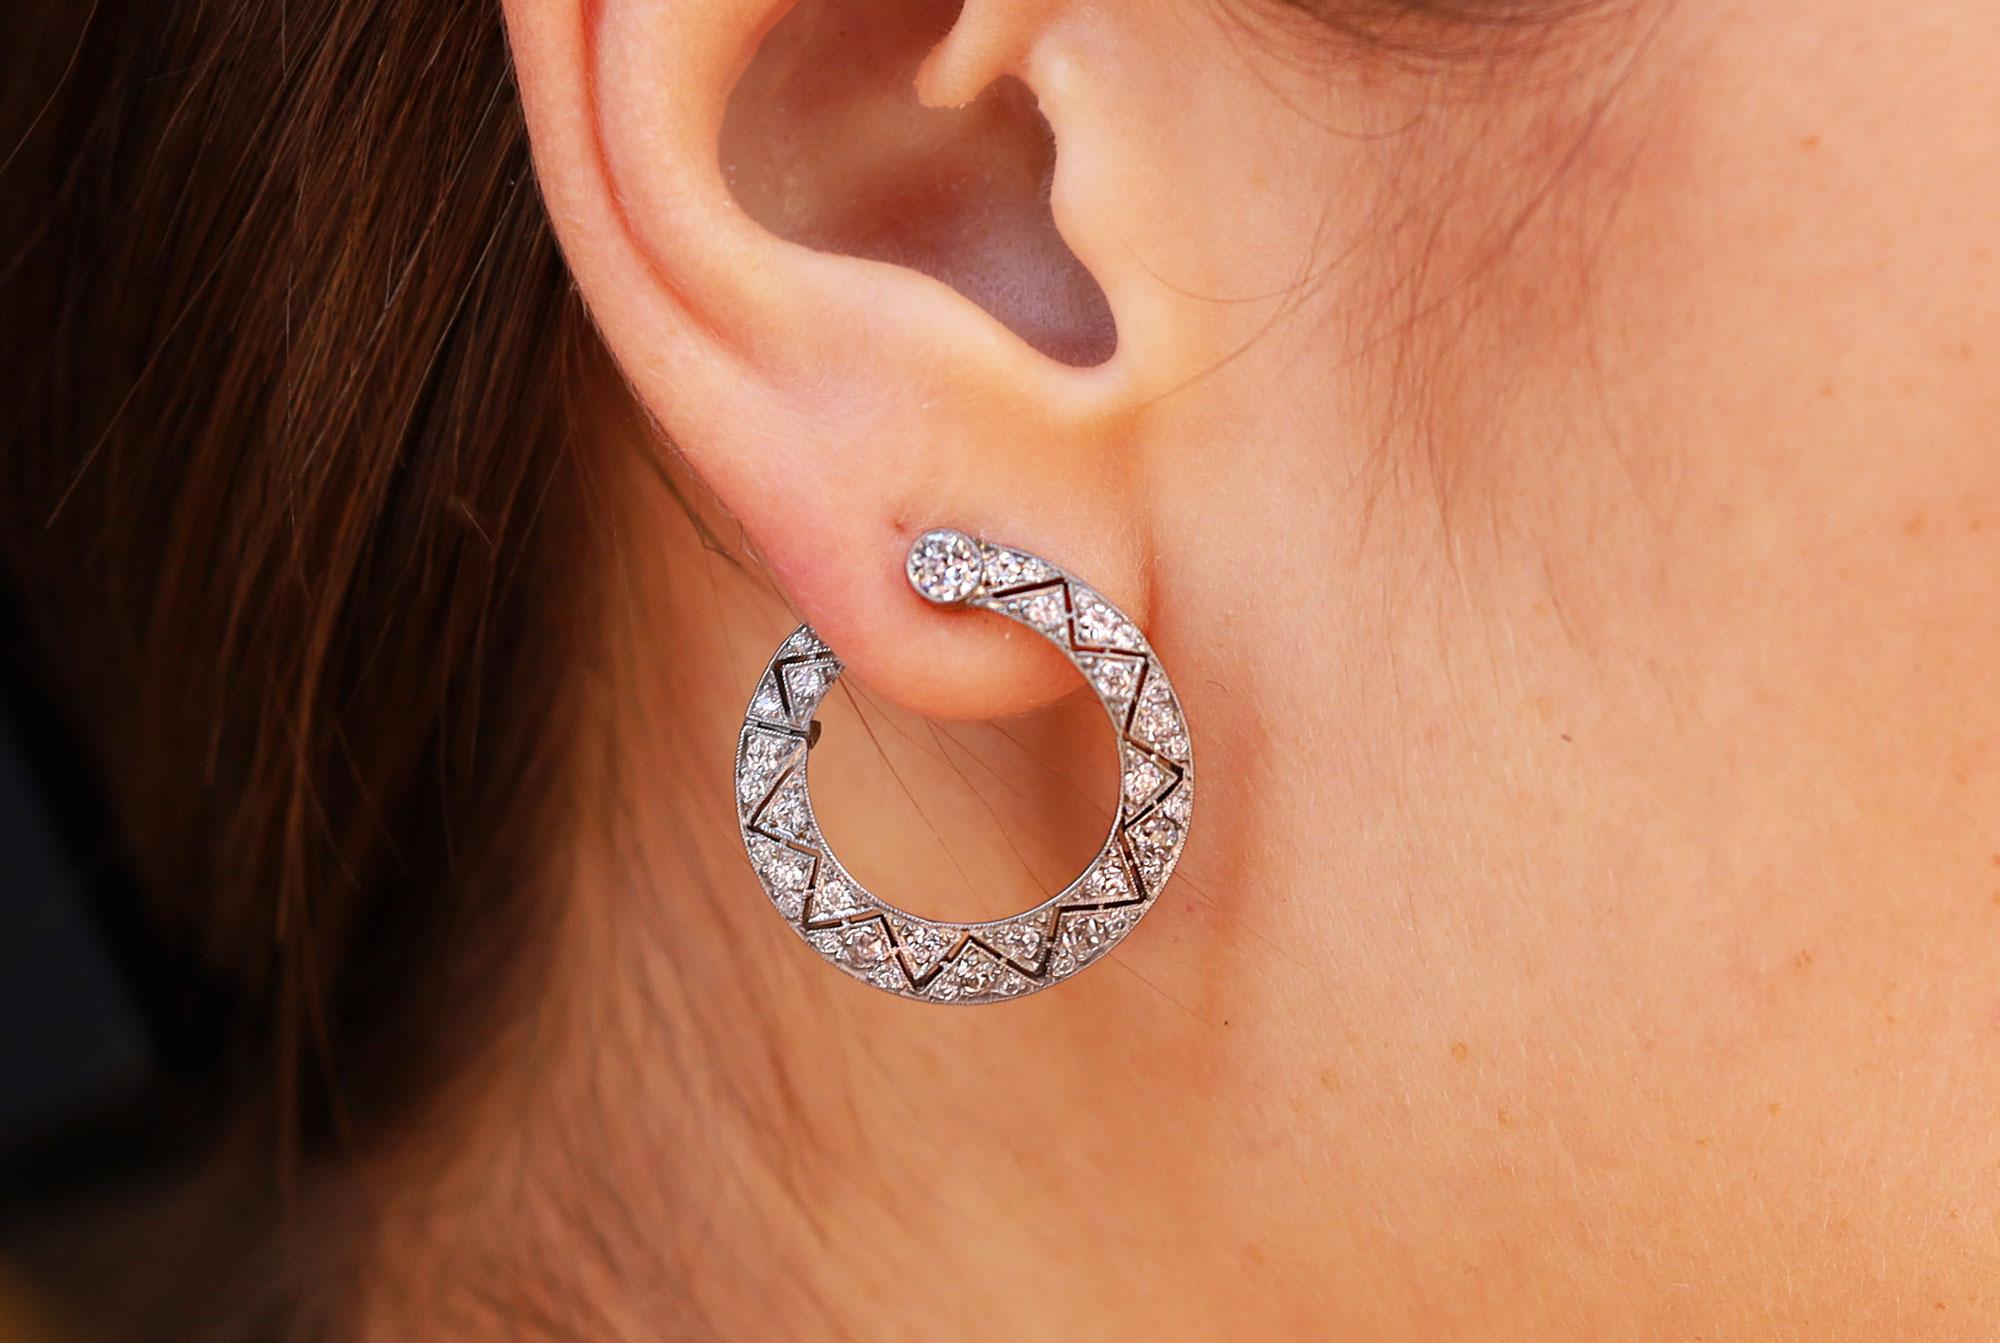 Art Deco Gatsby Era Diamond and Platinum Hoop Earrings In Excellent Condition For Sale In Santa Barbara, CA